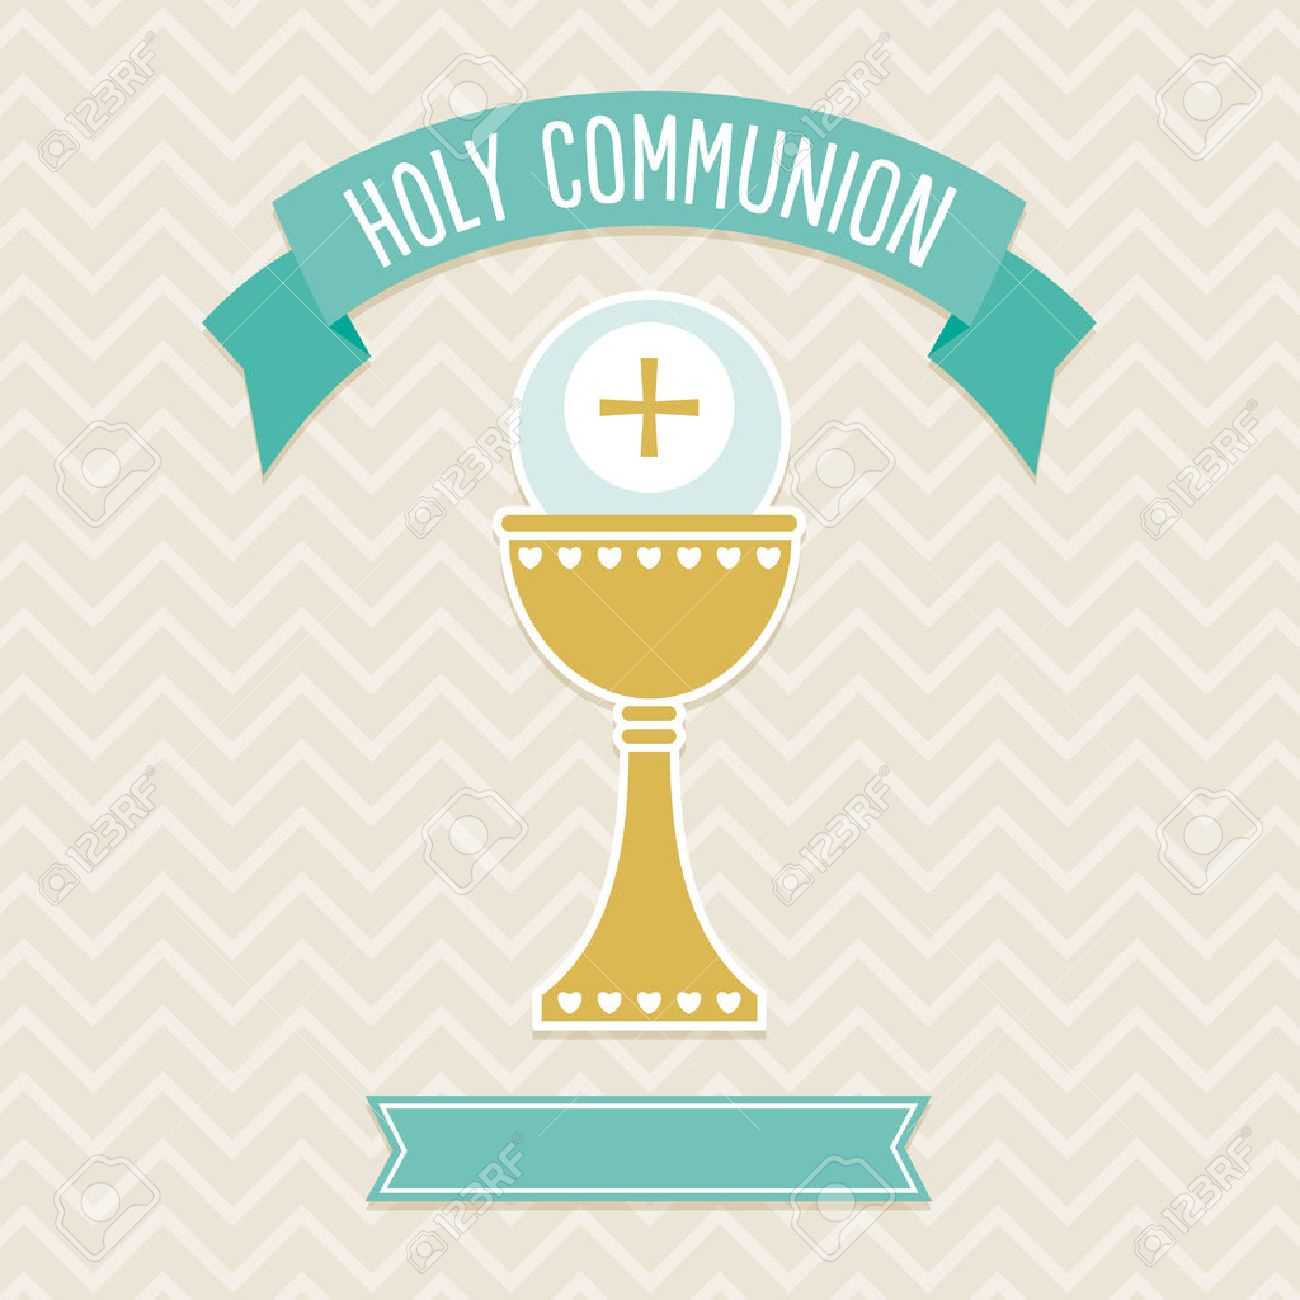 First Holy Communion Card Template In Cream And Aqua With Copy.. Throughout First Holy Communion Banner Templates